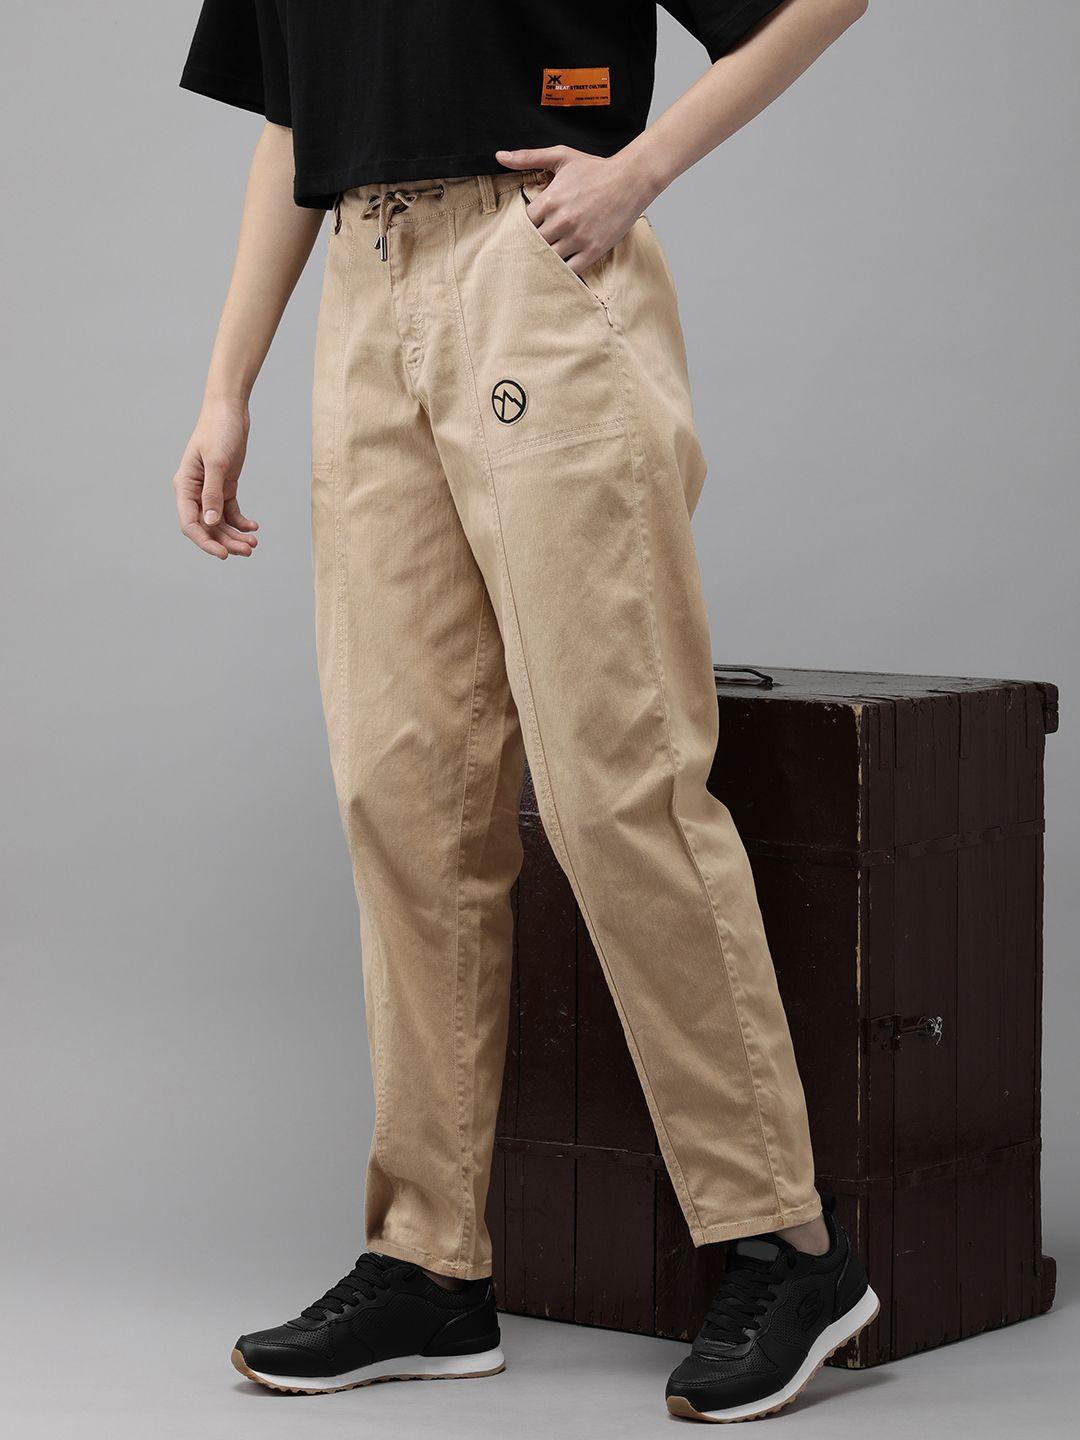 the roadster life co. women pure cotton trousers